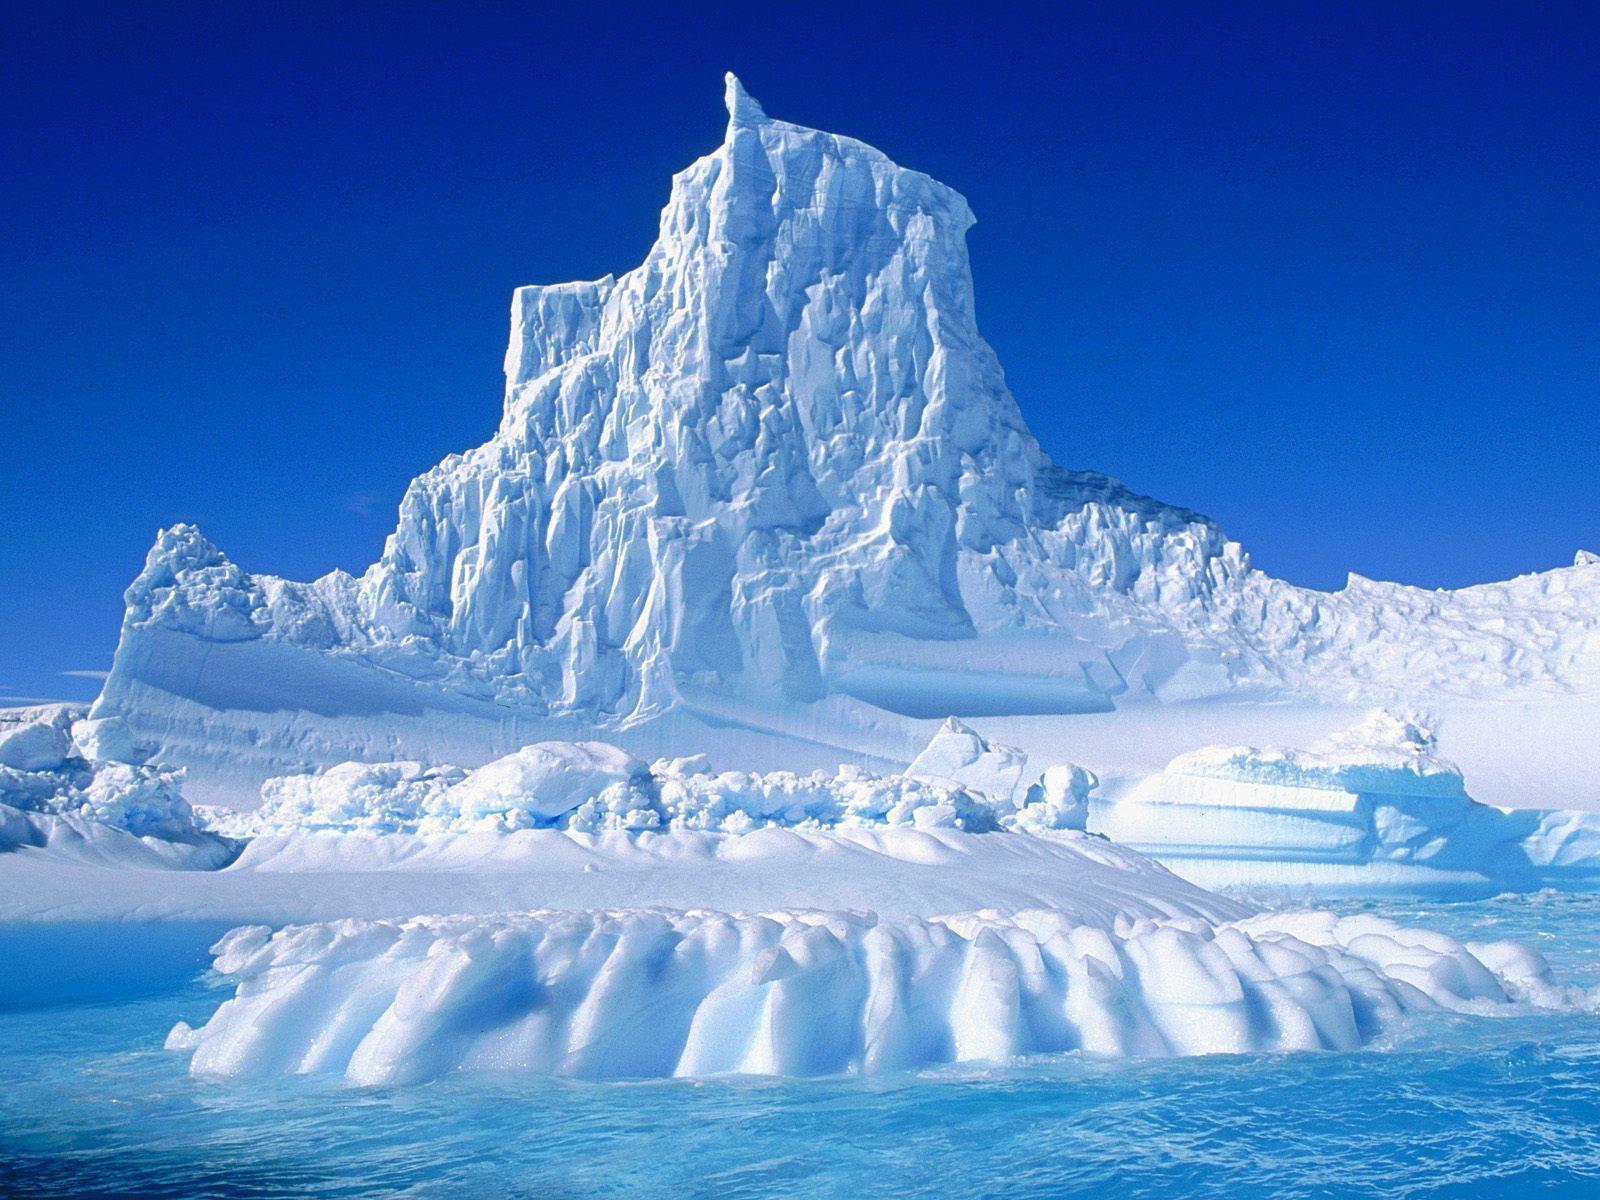 Eroded iceberg wallpaper and image, picture, photo